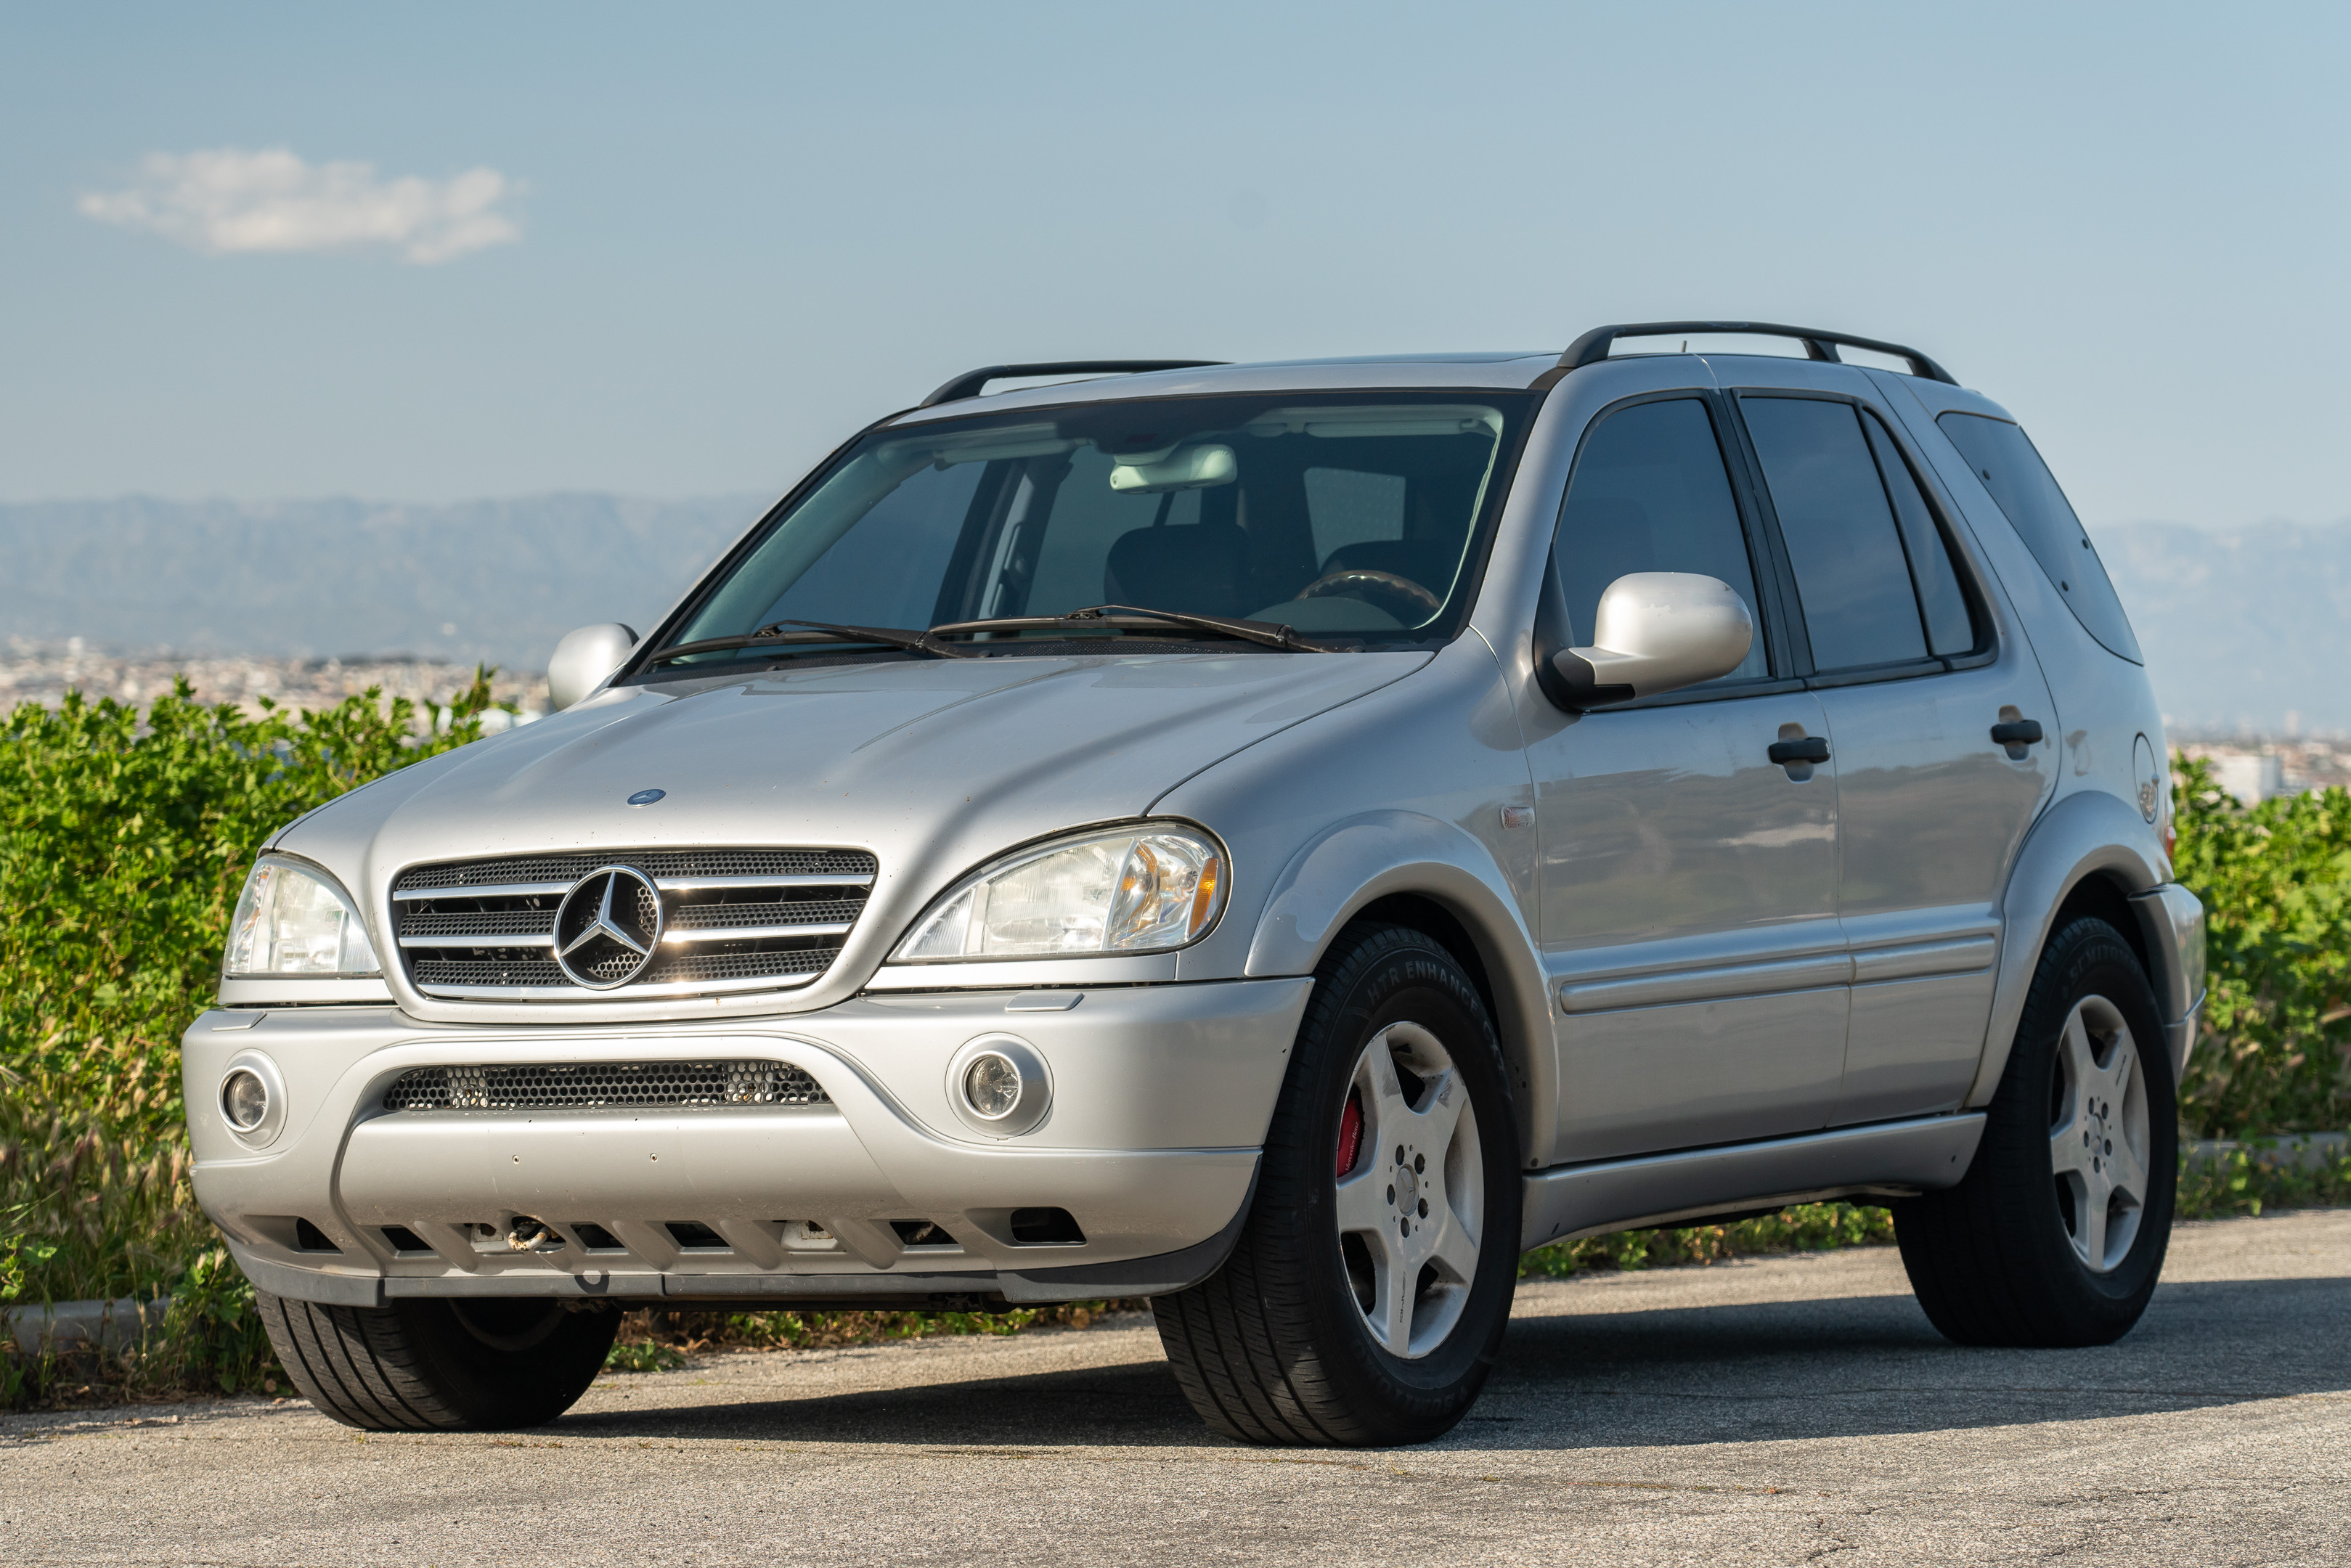 Used 2001 Mercedes-Benz M-Class for Sale Near Me | Cars.com